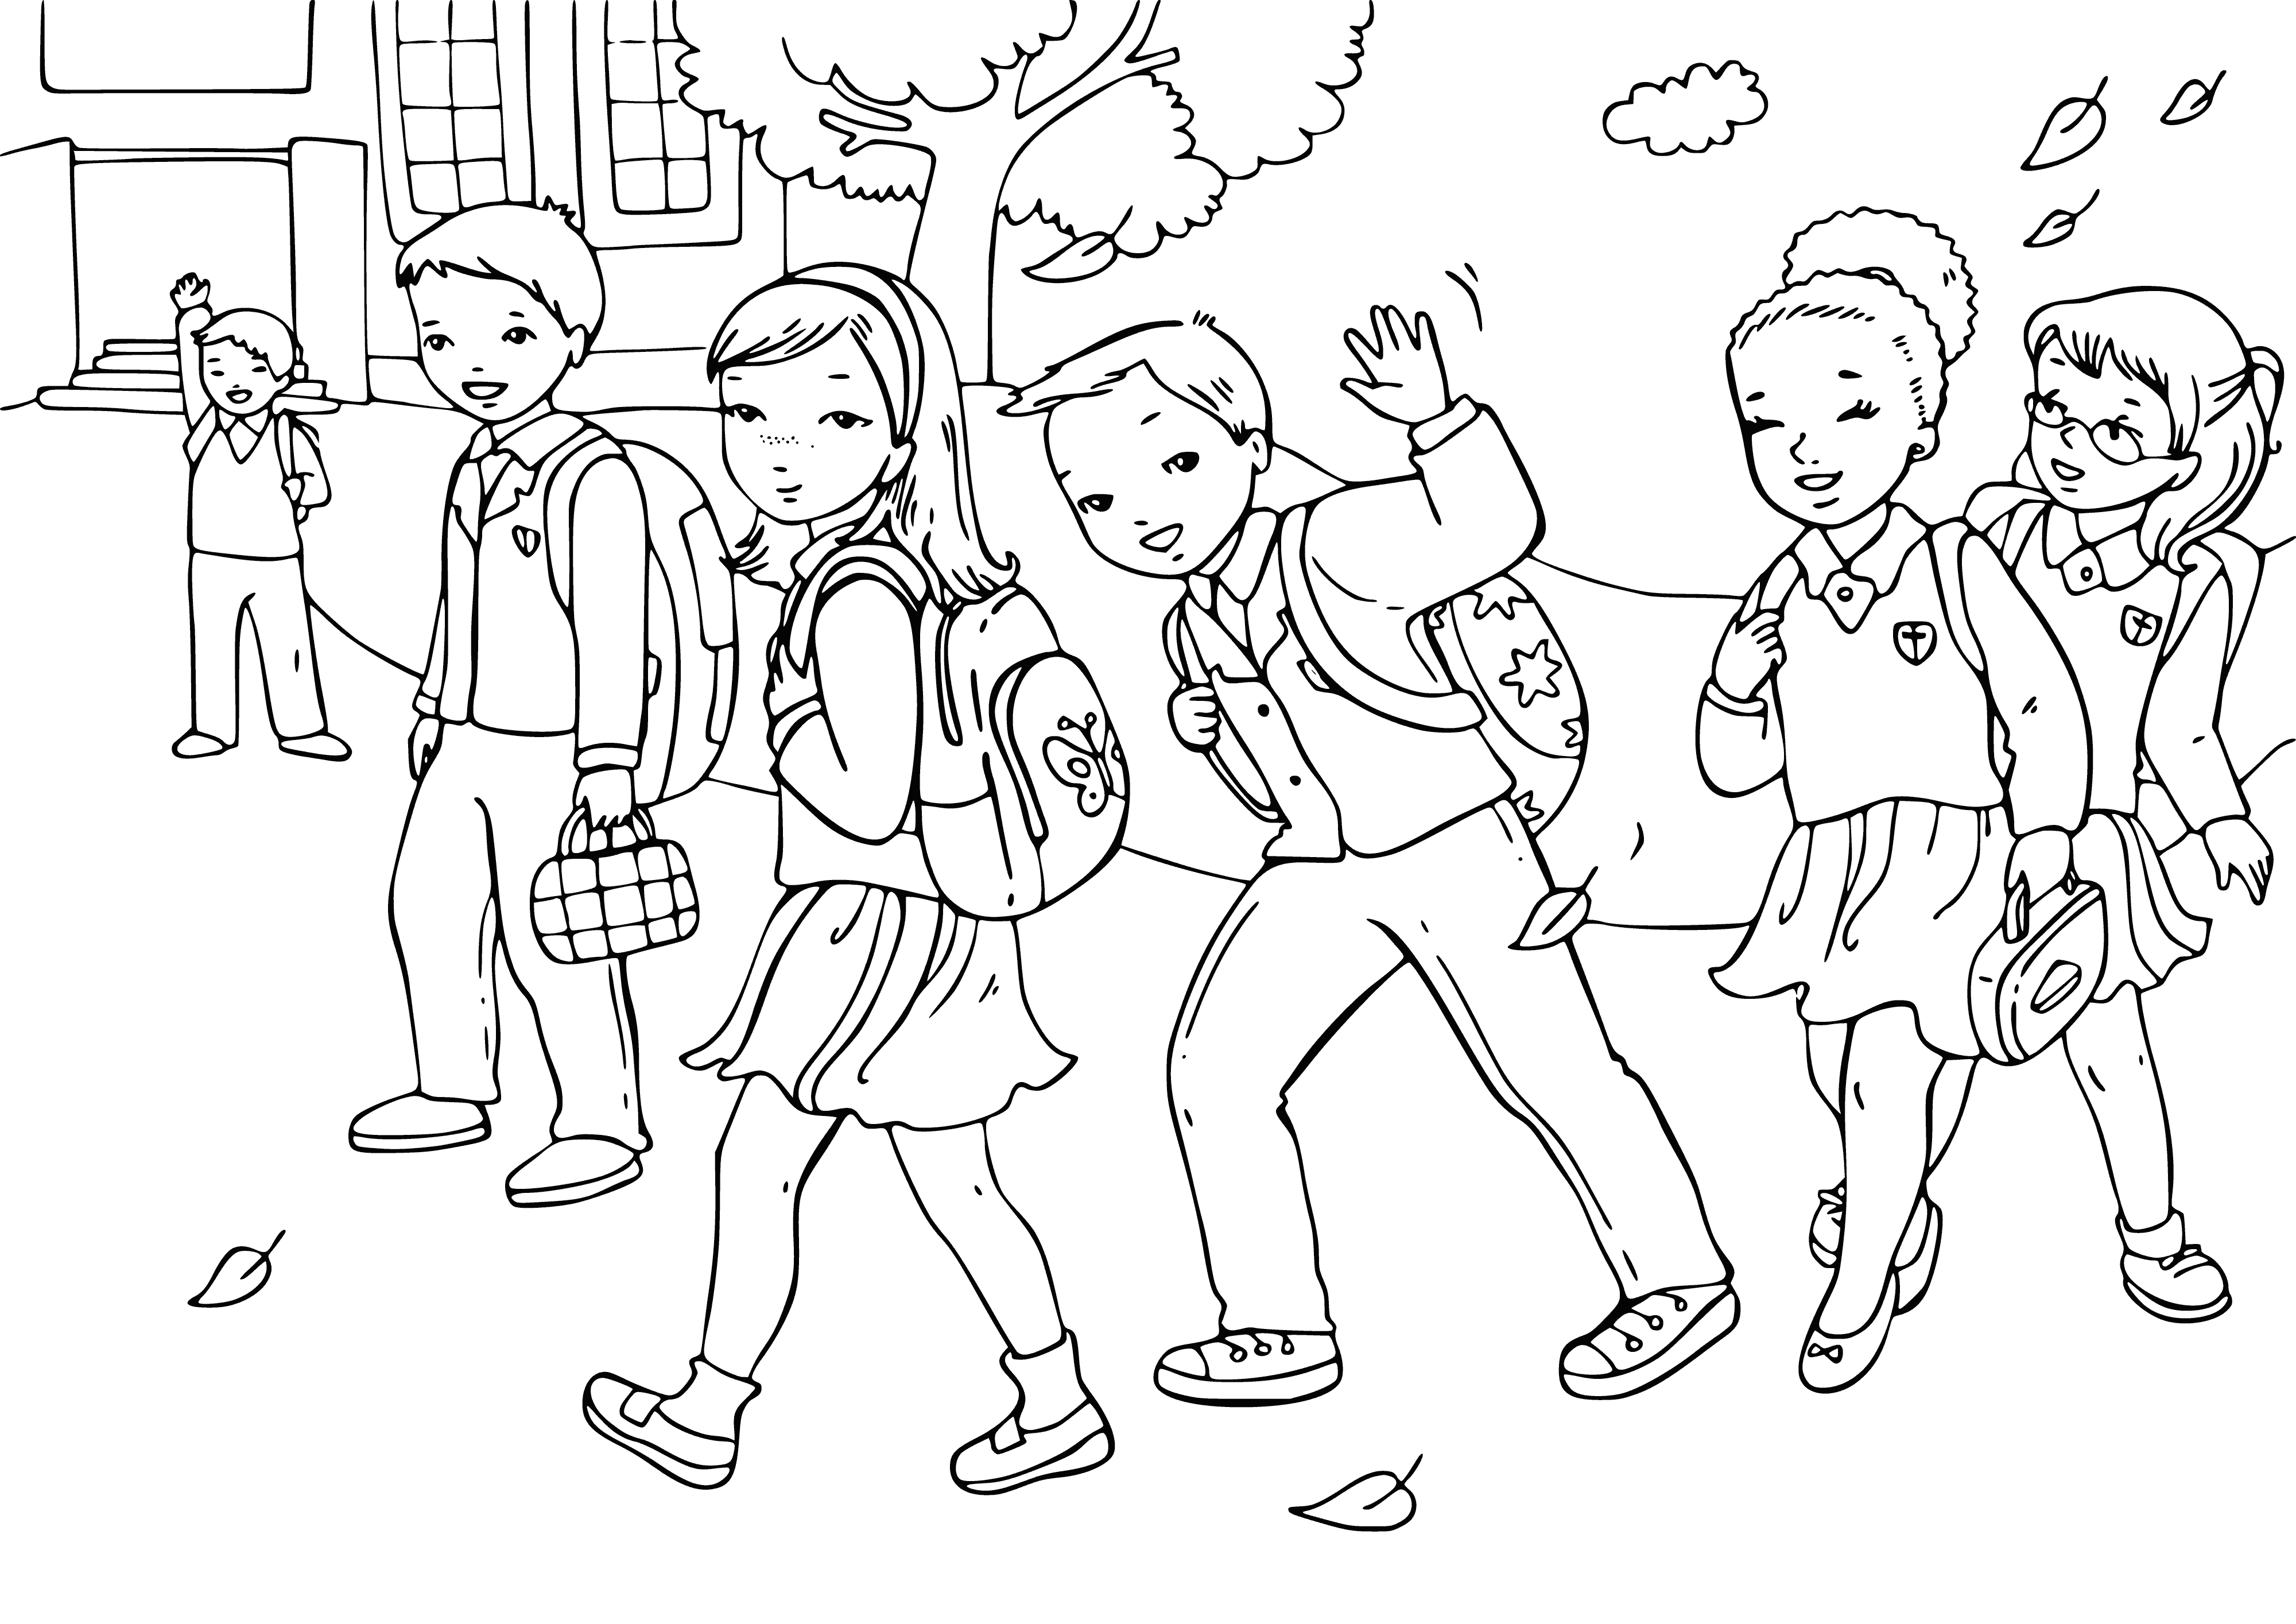 coloring page: Students walking to school on 1st day wearing uniforms, carrying backpacks in clean, safe environment. #firstdayofschool